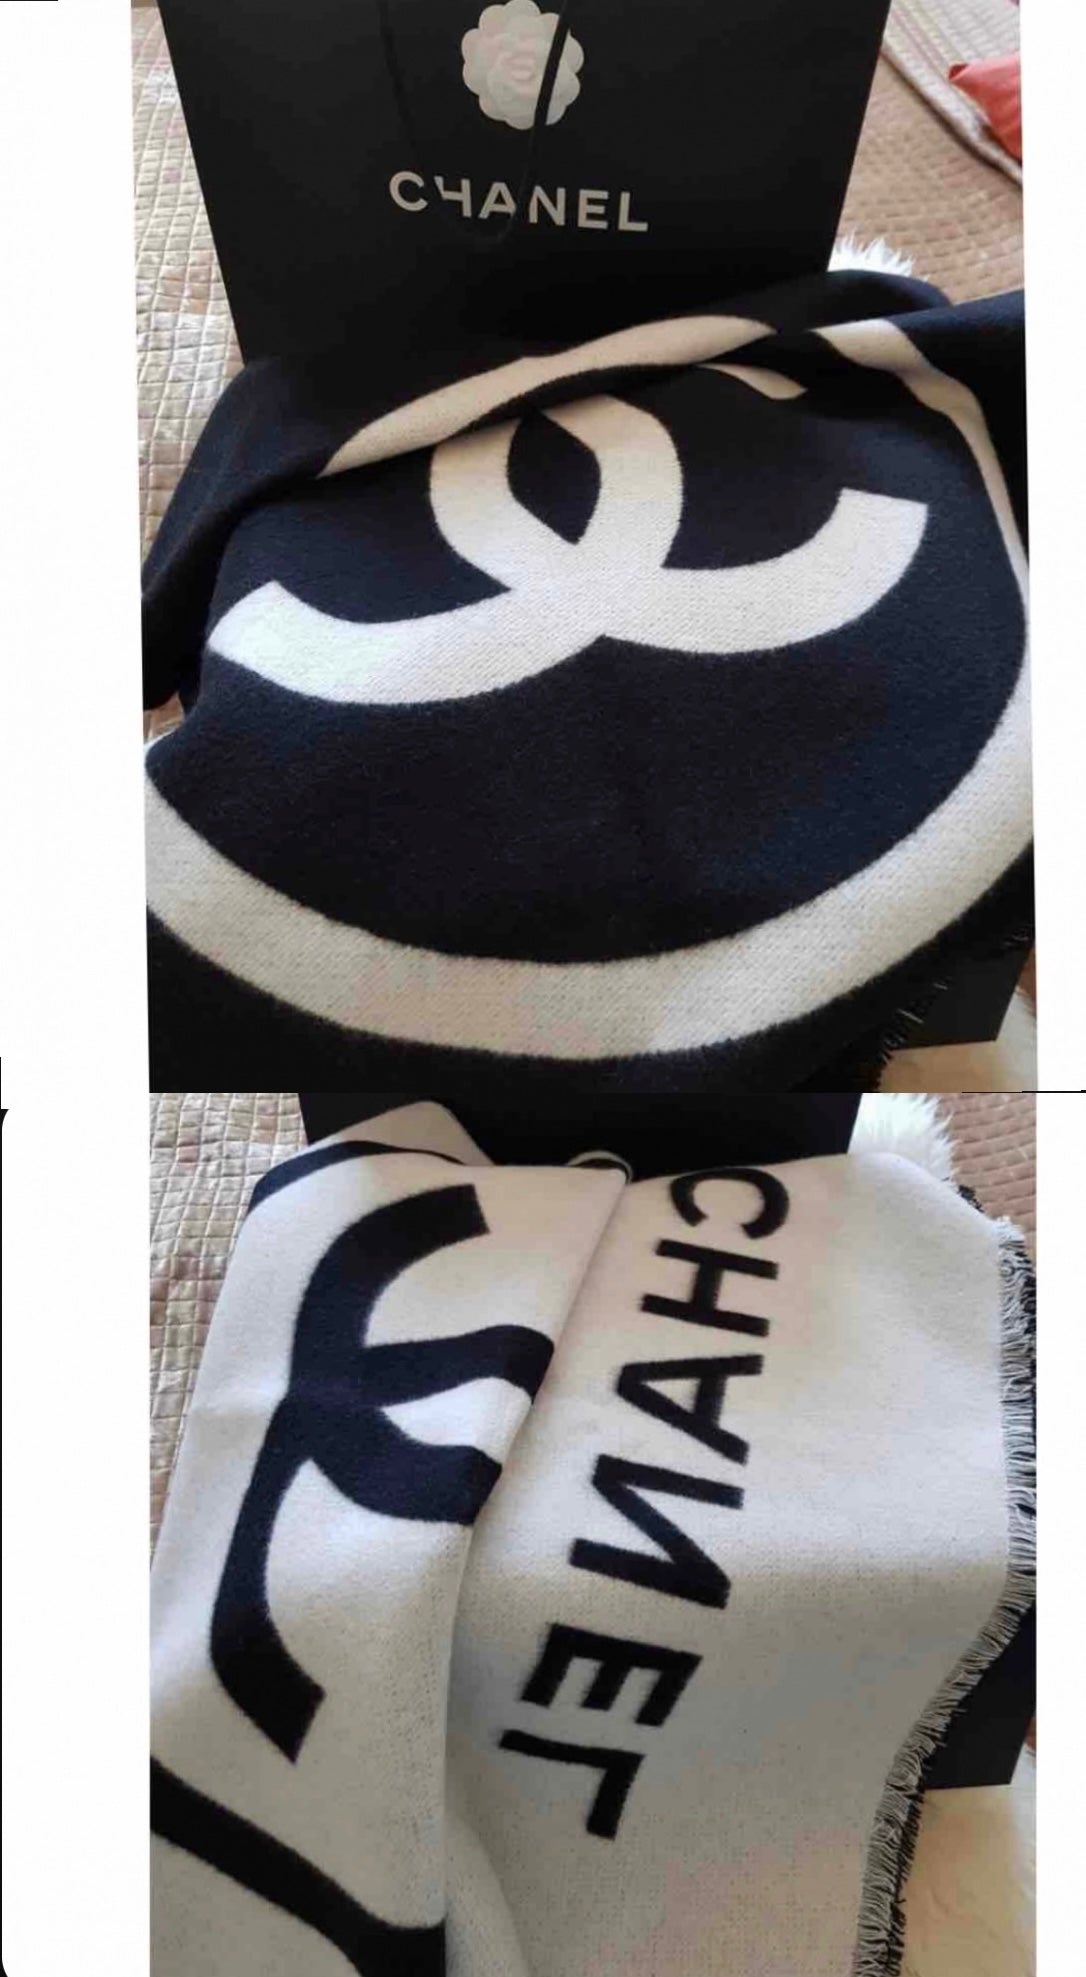 Chanel Grey, White and Black Shearling Cushion